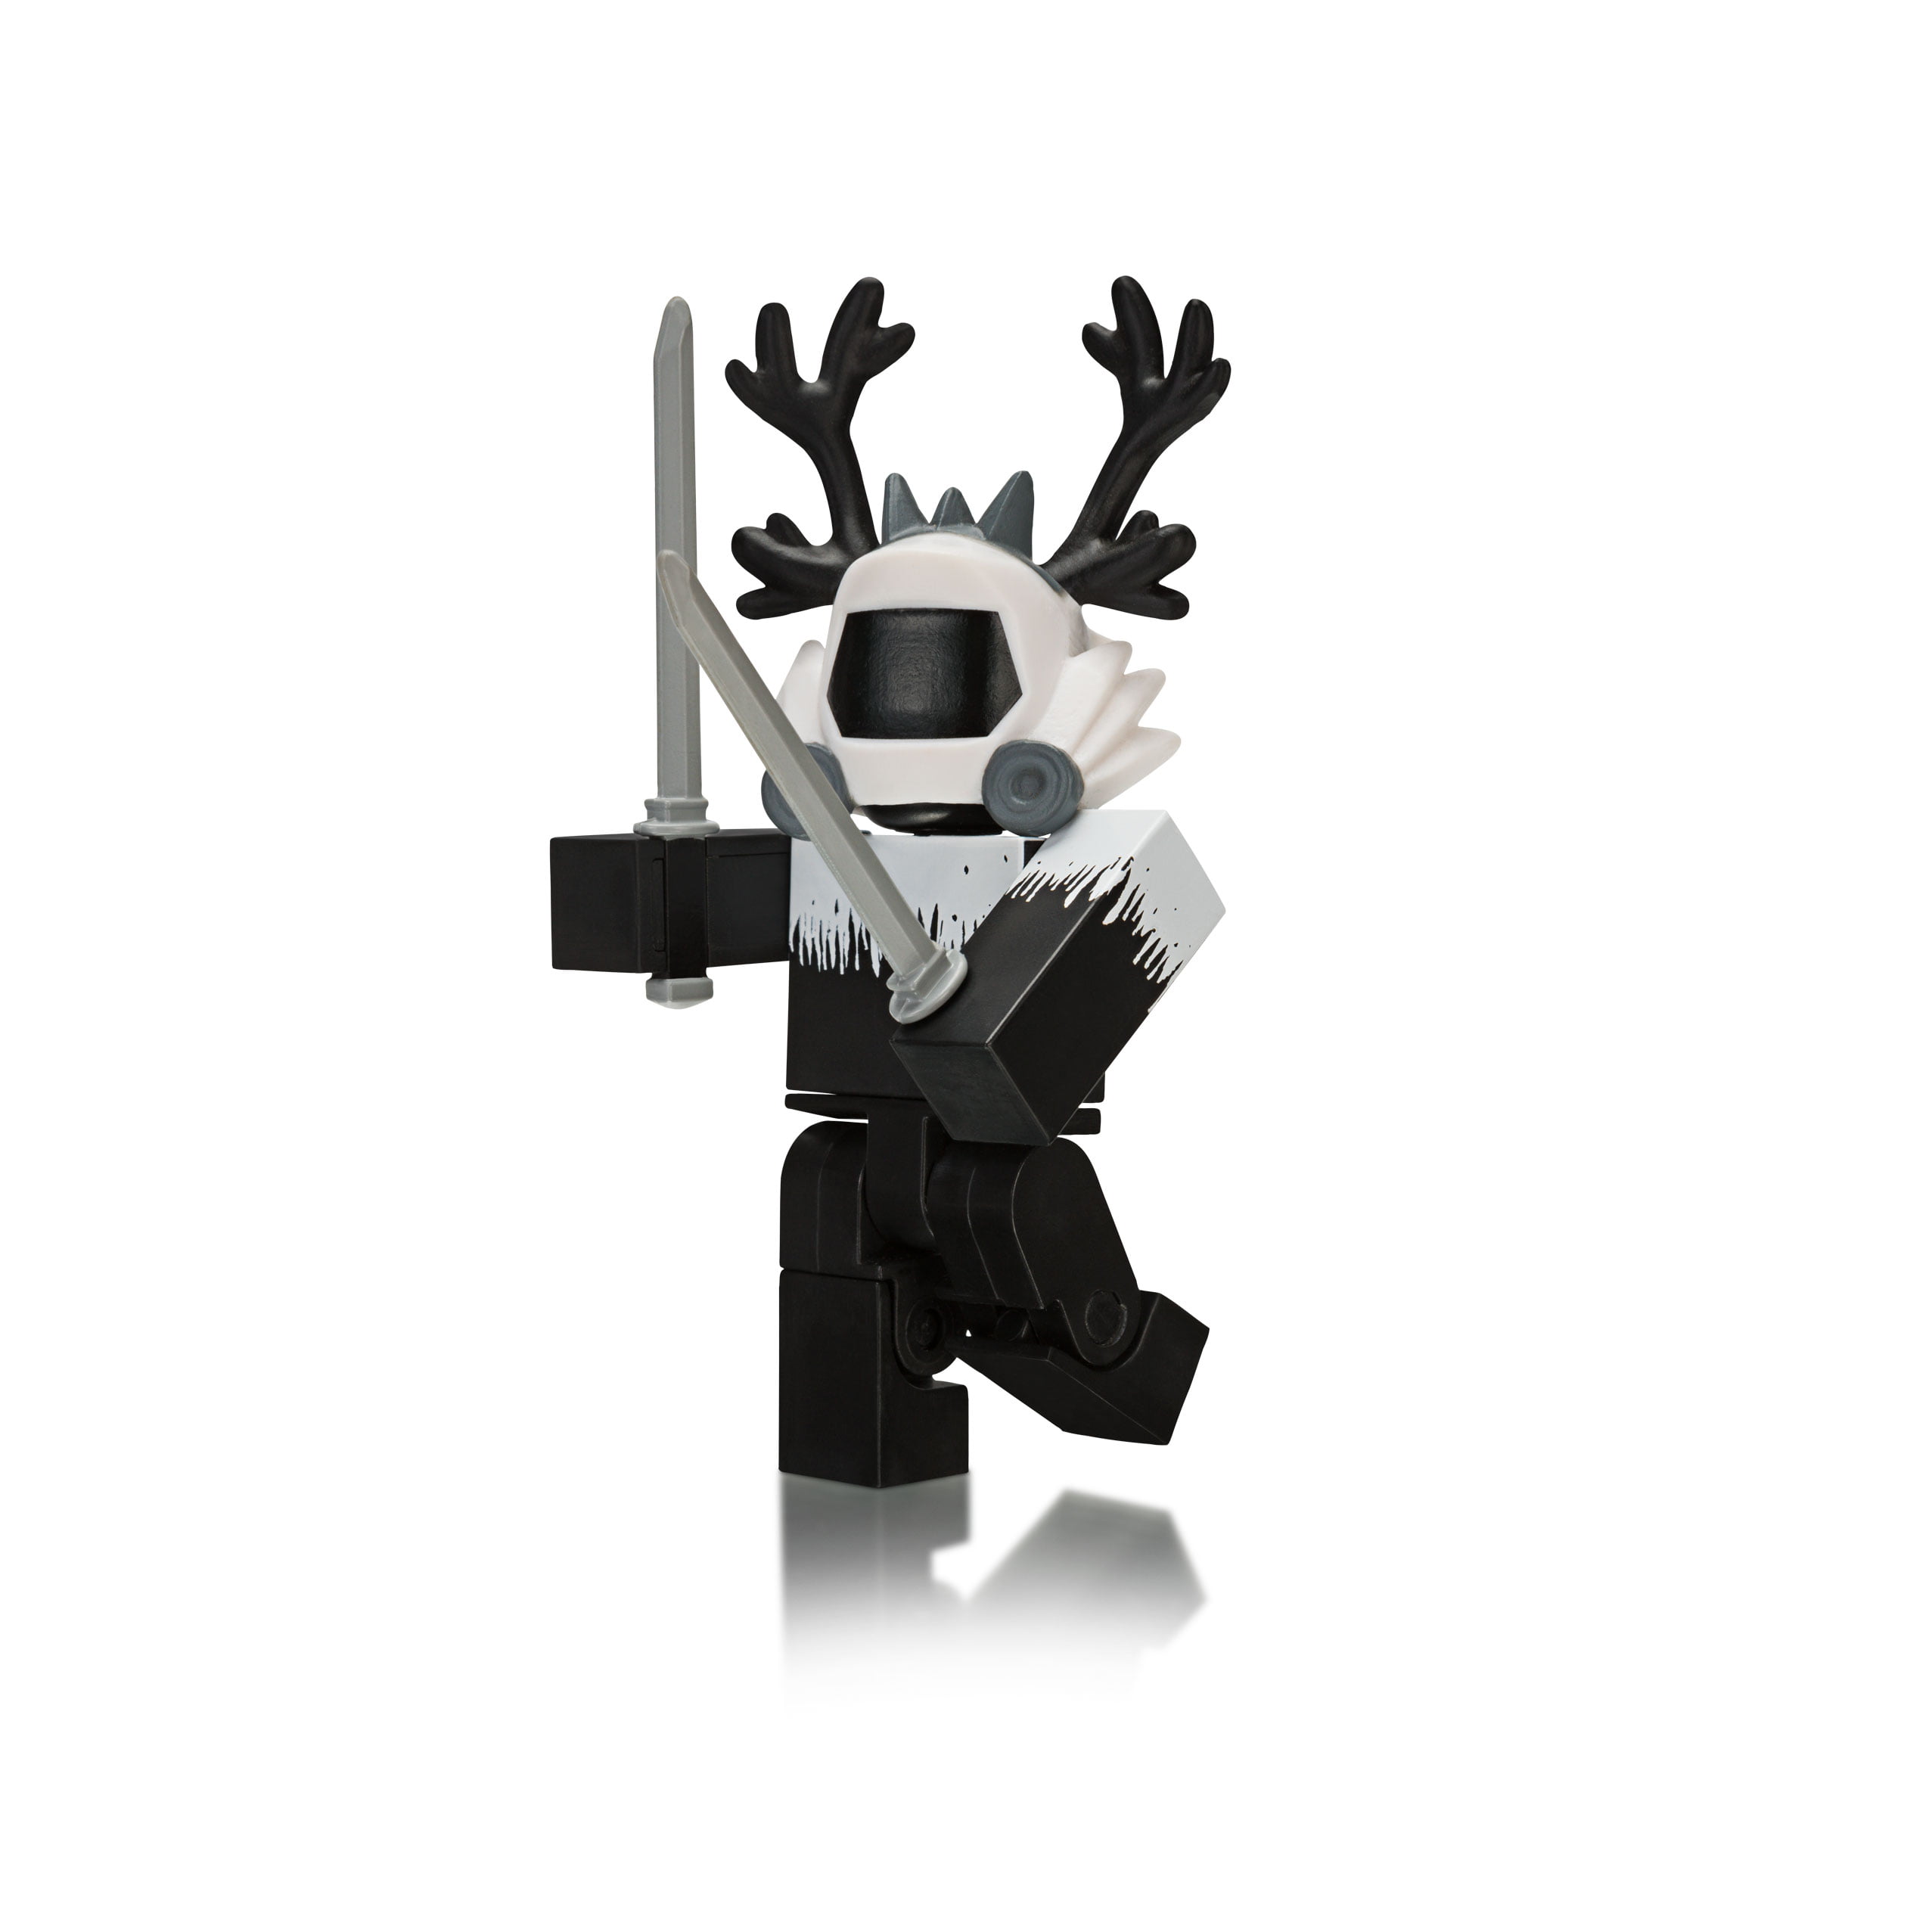 Roblox Action Collection Series 6 Mystery Figure Includes 1 Figure Exclusive Virtual Item Walmart Com Walmart Com - roblox series 6 mystery figure six pack tiendamia com